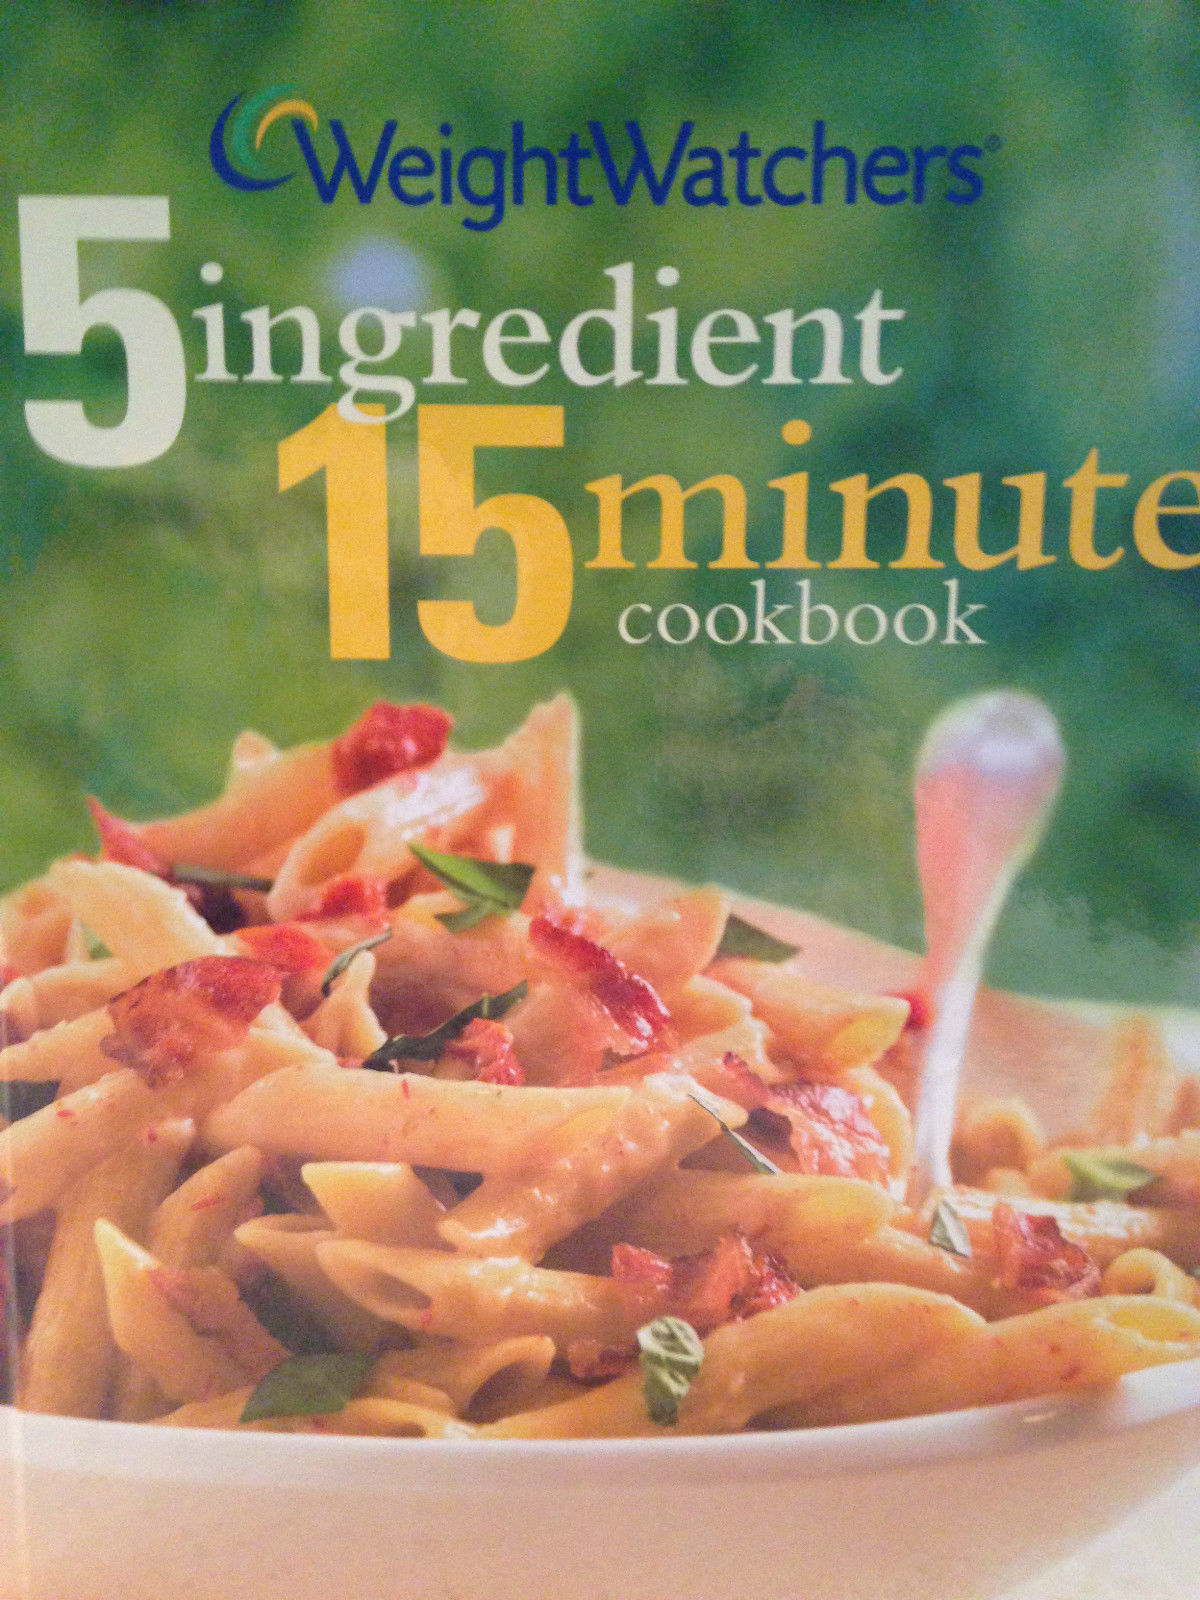 Primary image for Weight Watchers 5 Ingredient 15 Minute Cookbook 2002 Hardcover First Edition